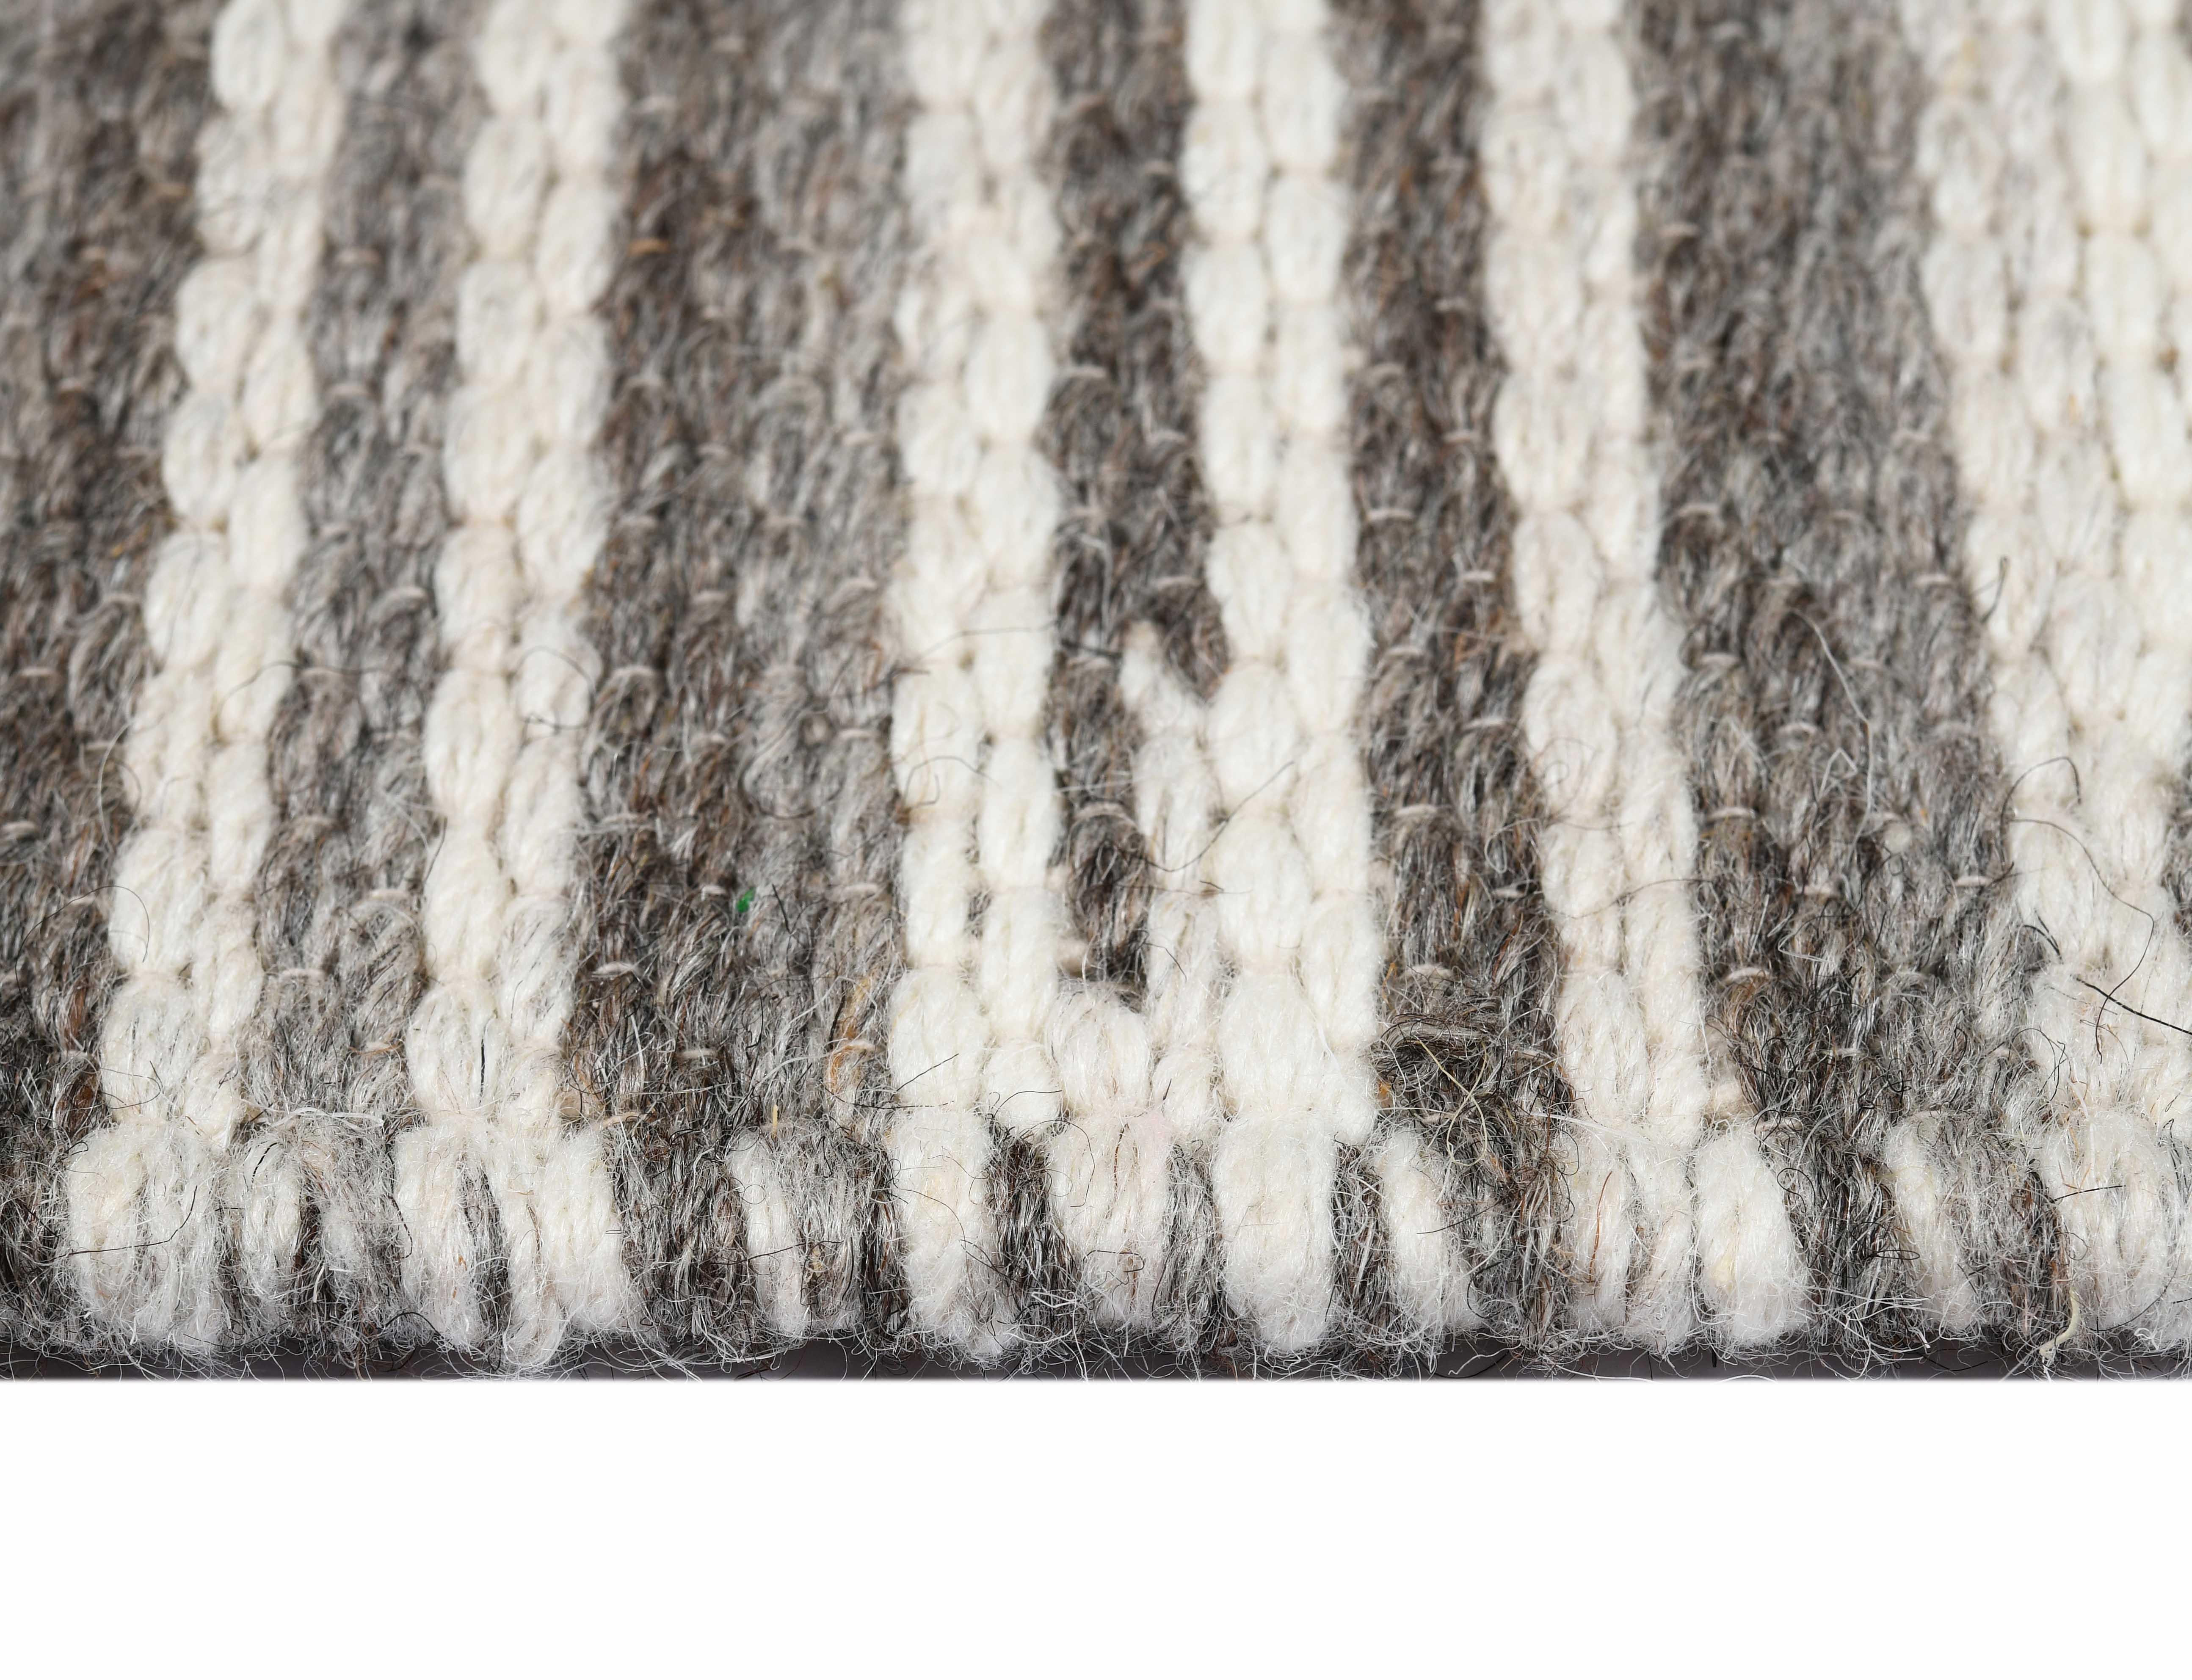 Indian Rivus, Grey, Handwoven Face 60% Undyed NZ Wool, 40% Undyed MED Wool, 8' x 10' For Sale